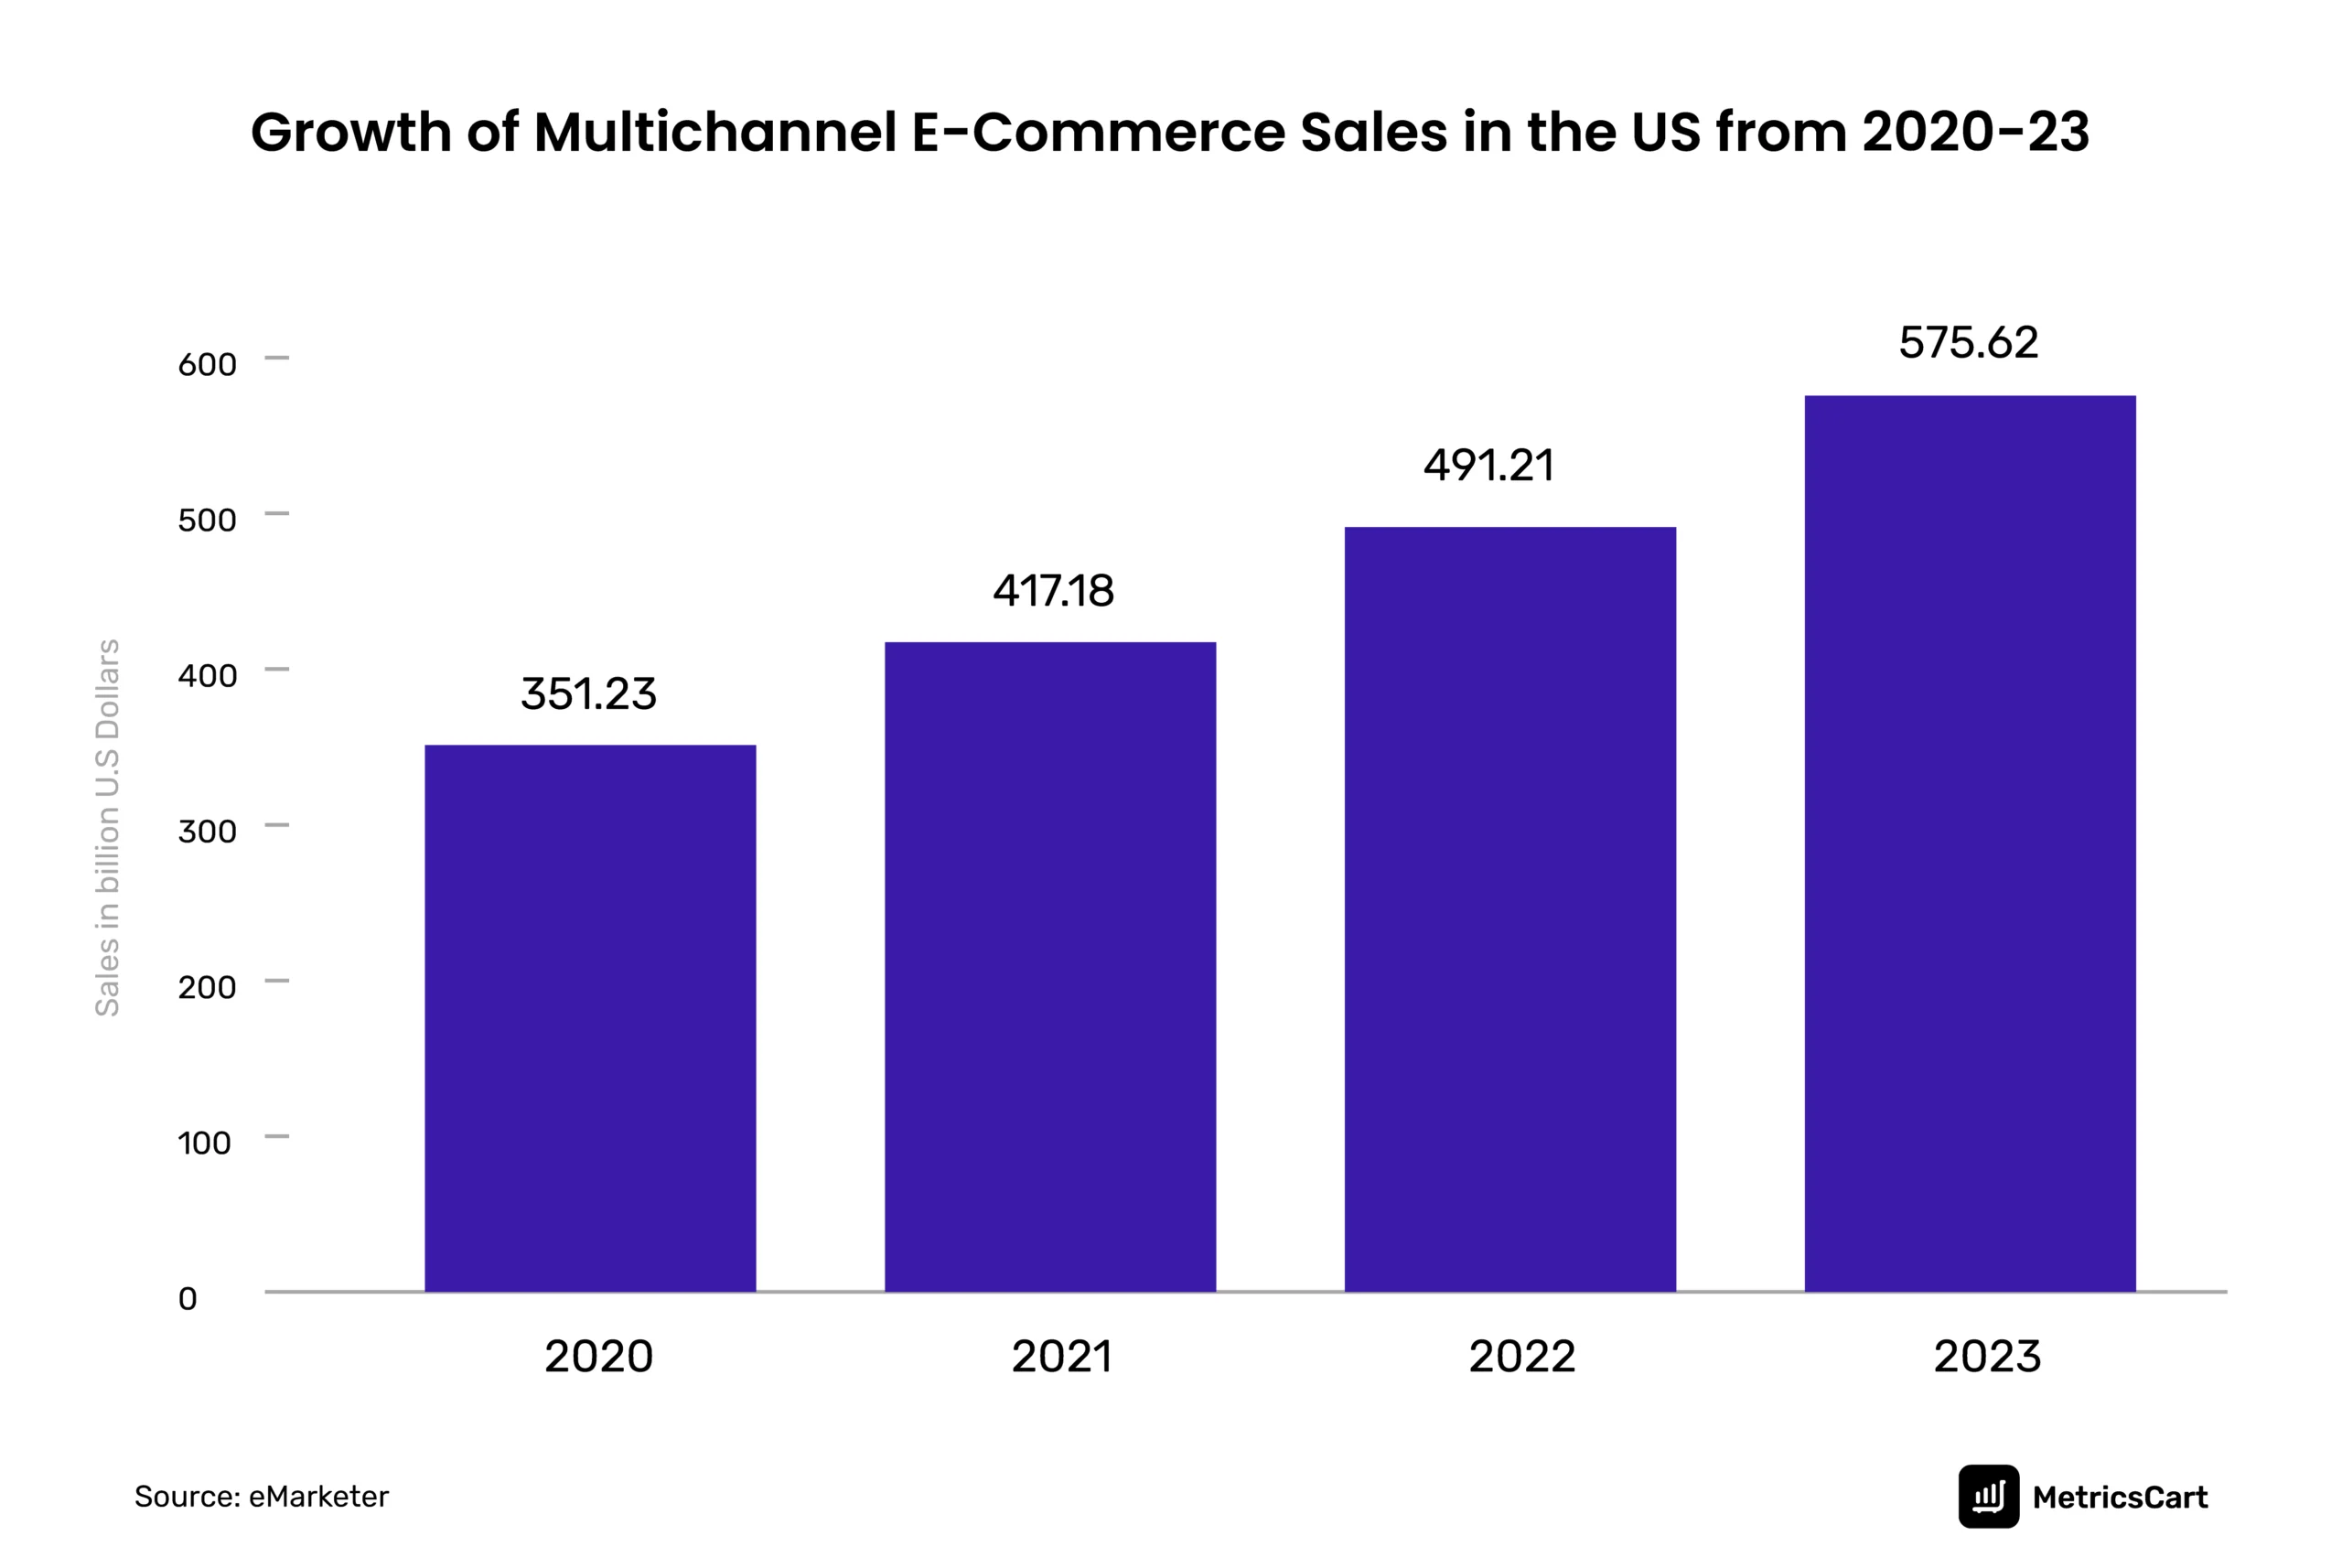 the graph shows an increase in multi-channel e-commerce sales from 2020 to 2023